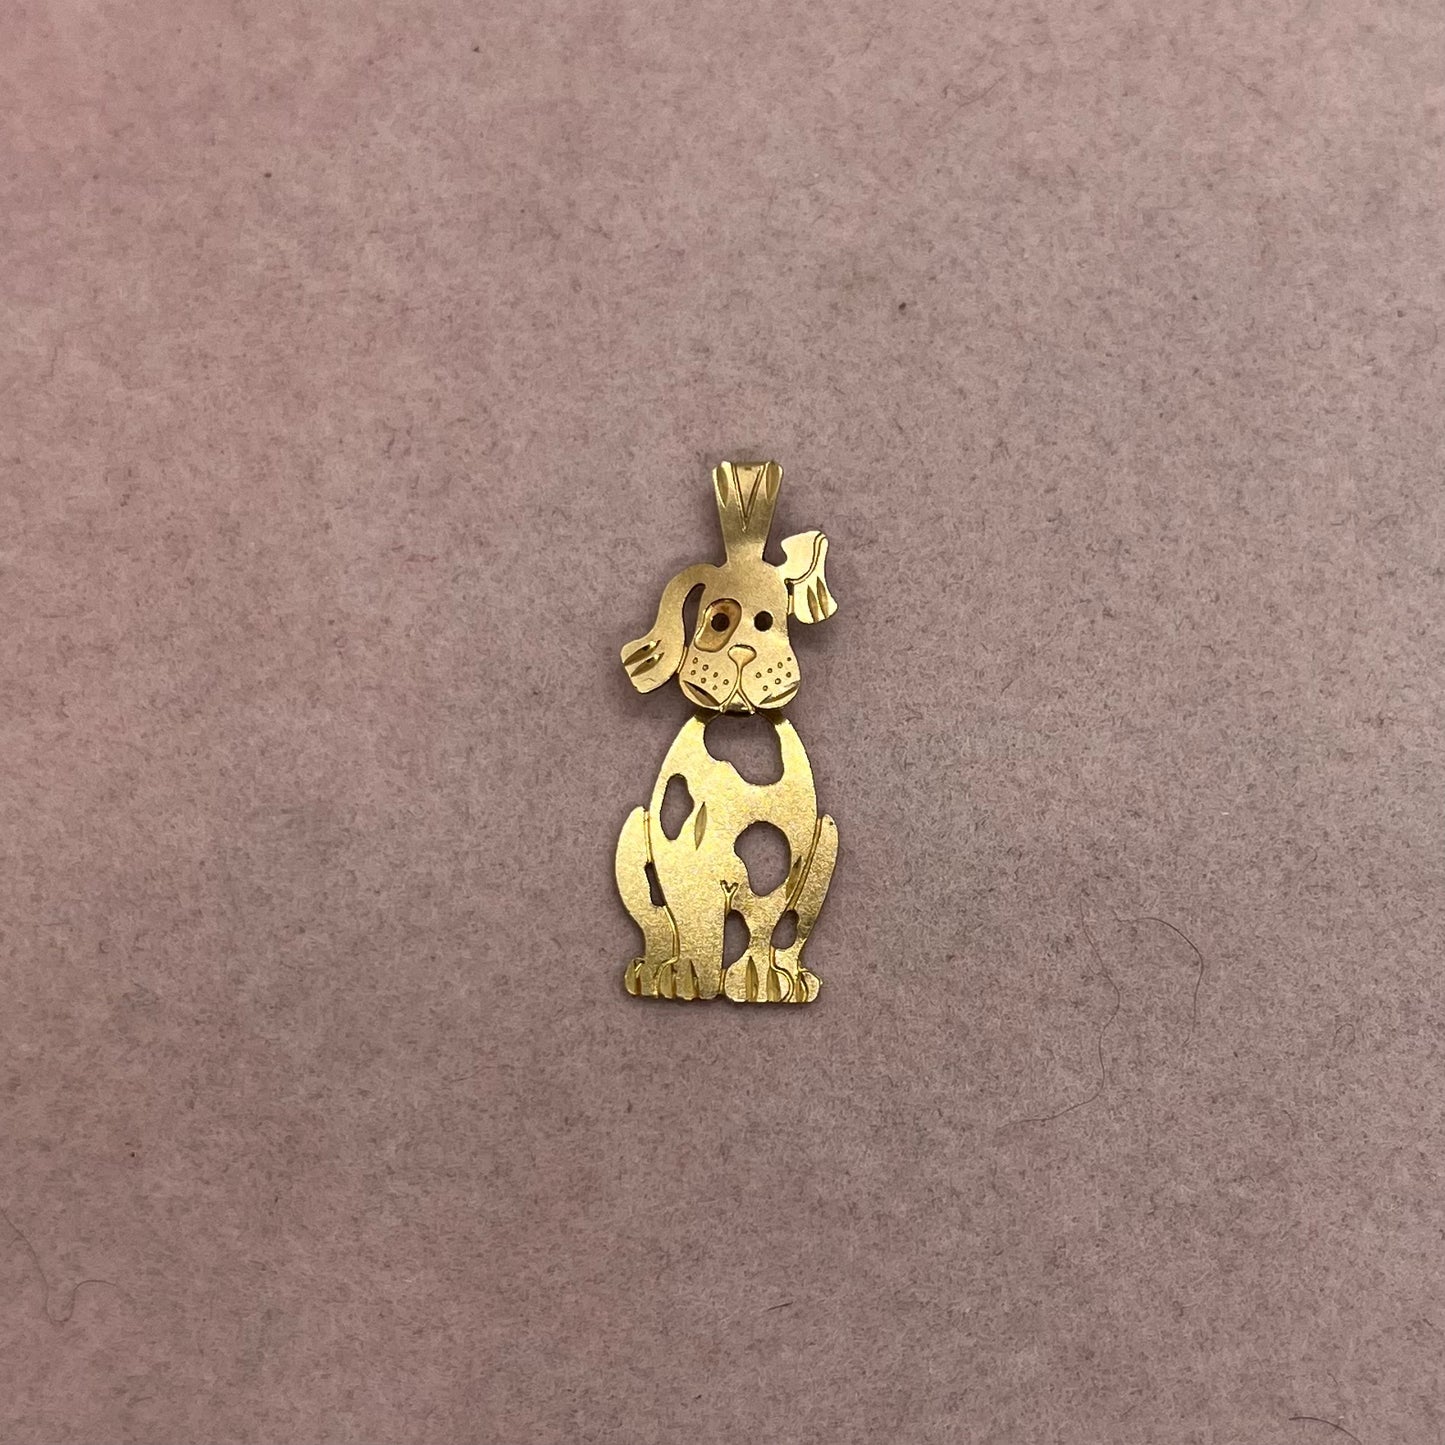 Spotted Dog Charm With Moving Head